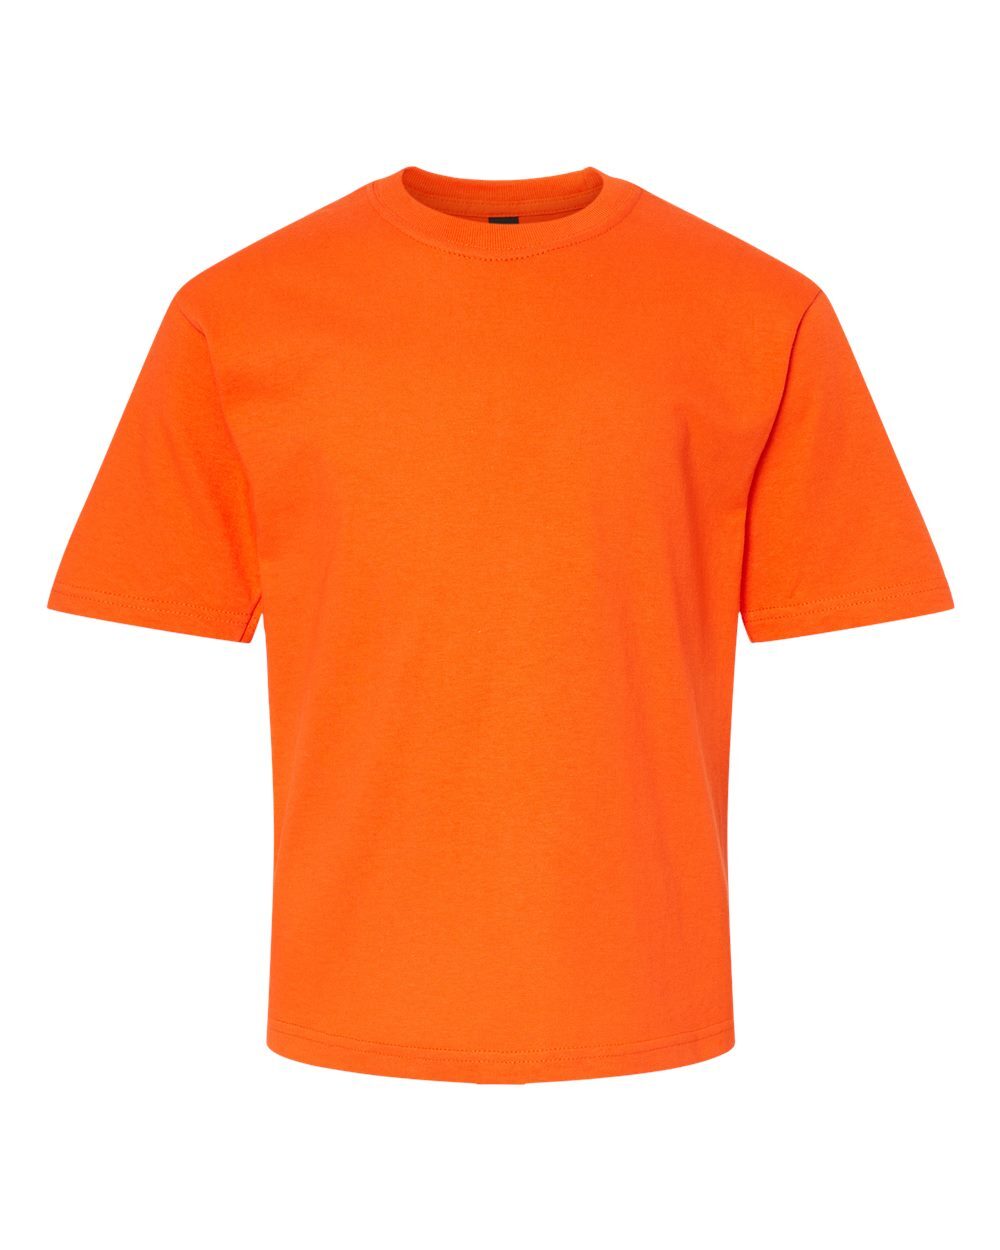 M&O, 4850 Youth Soft Touch T-Shirt